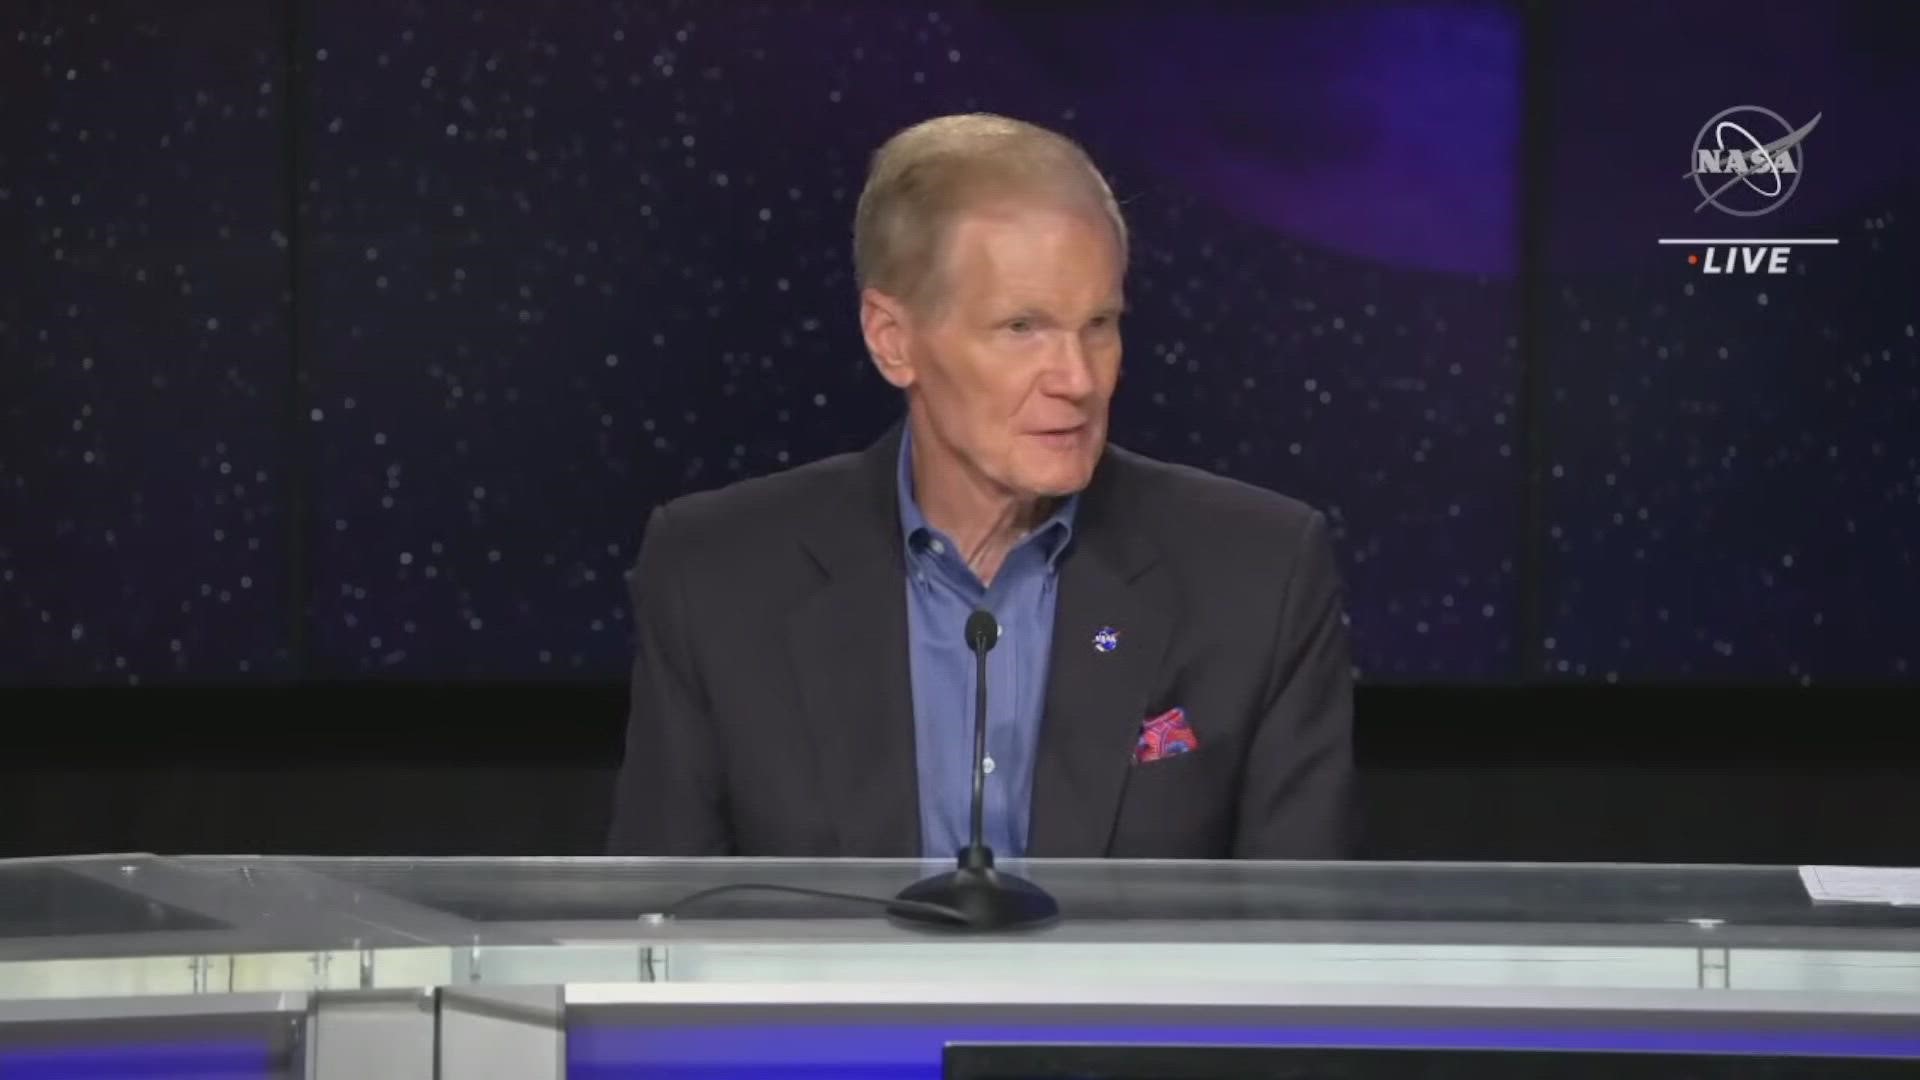 NASA administrator Bill Nelson spoke after Artemis's Monday launch attempt was canned due to engine issues.